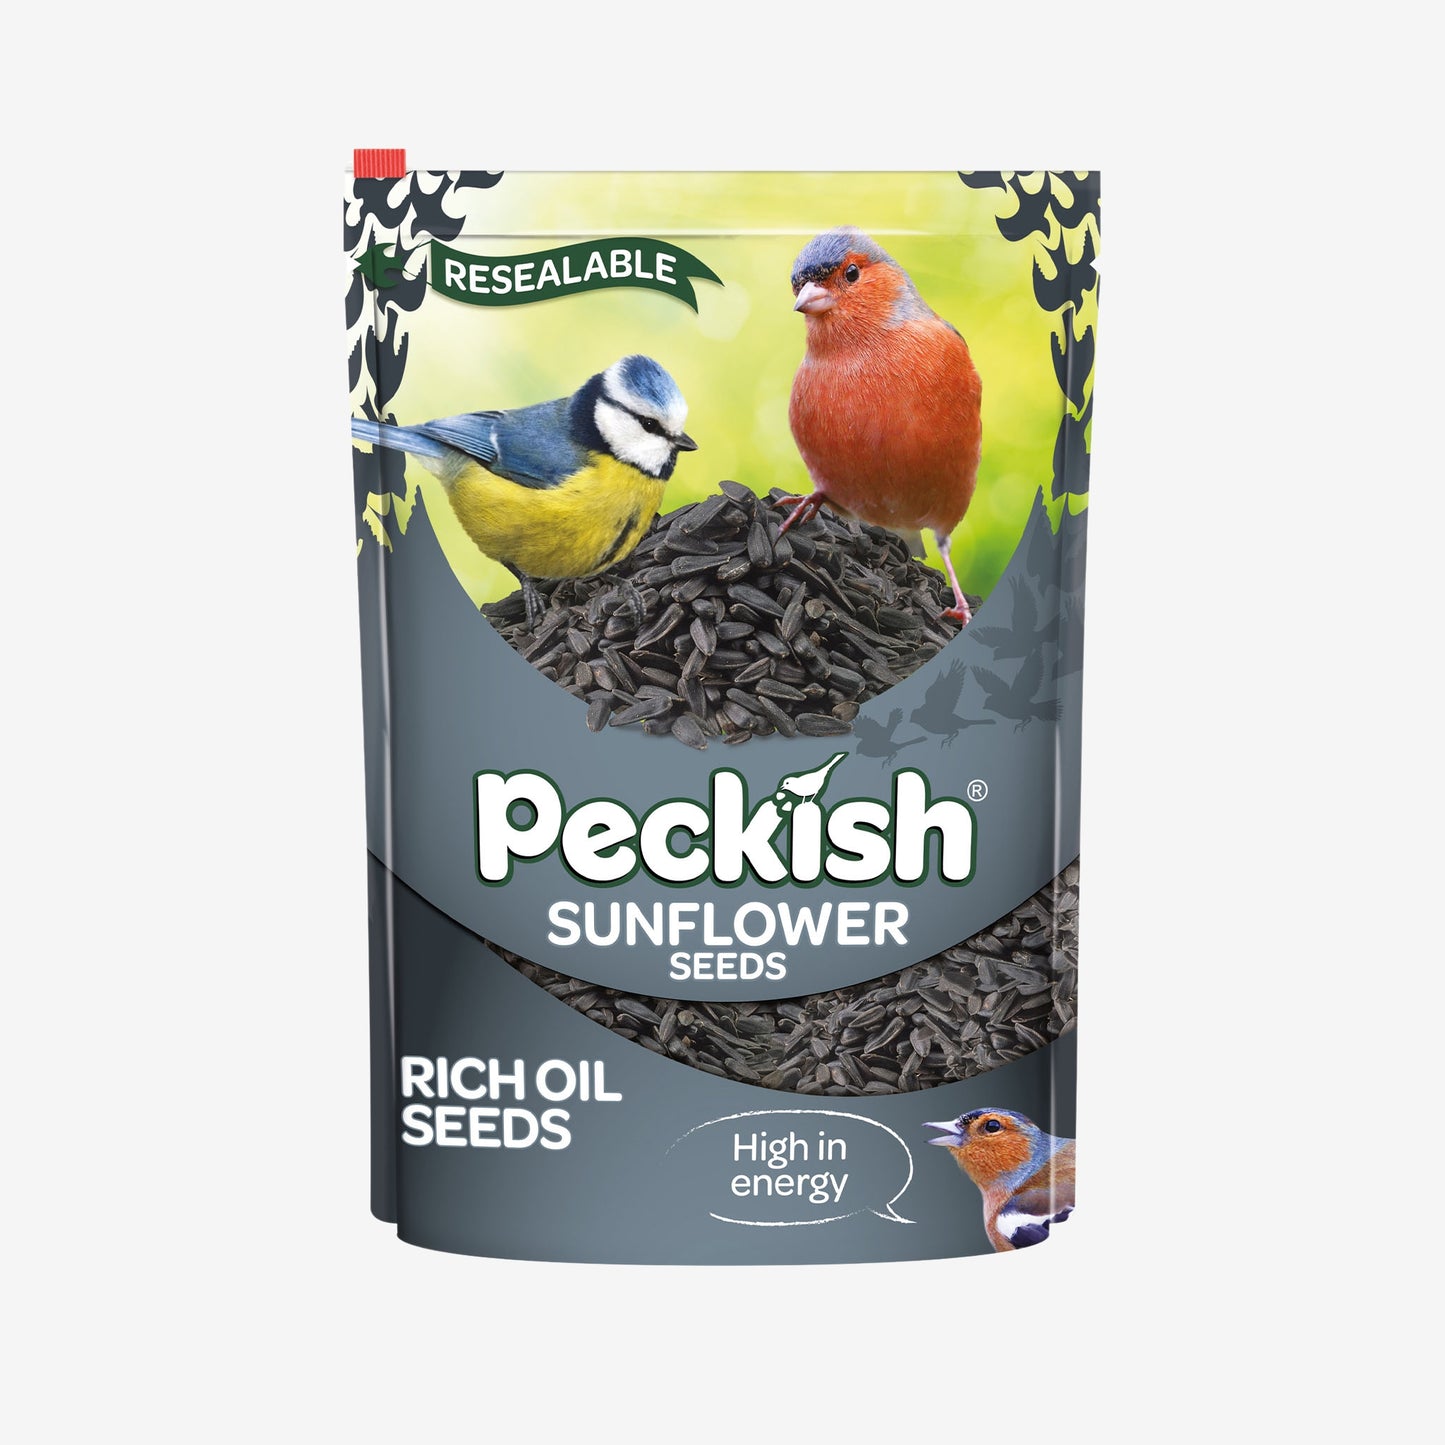 Peckish Sunflower Seeds in packaging